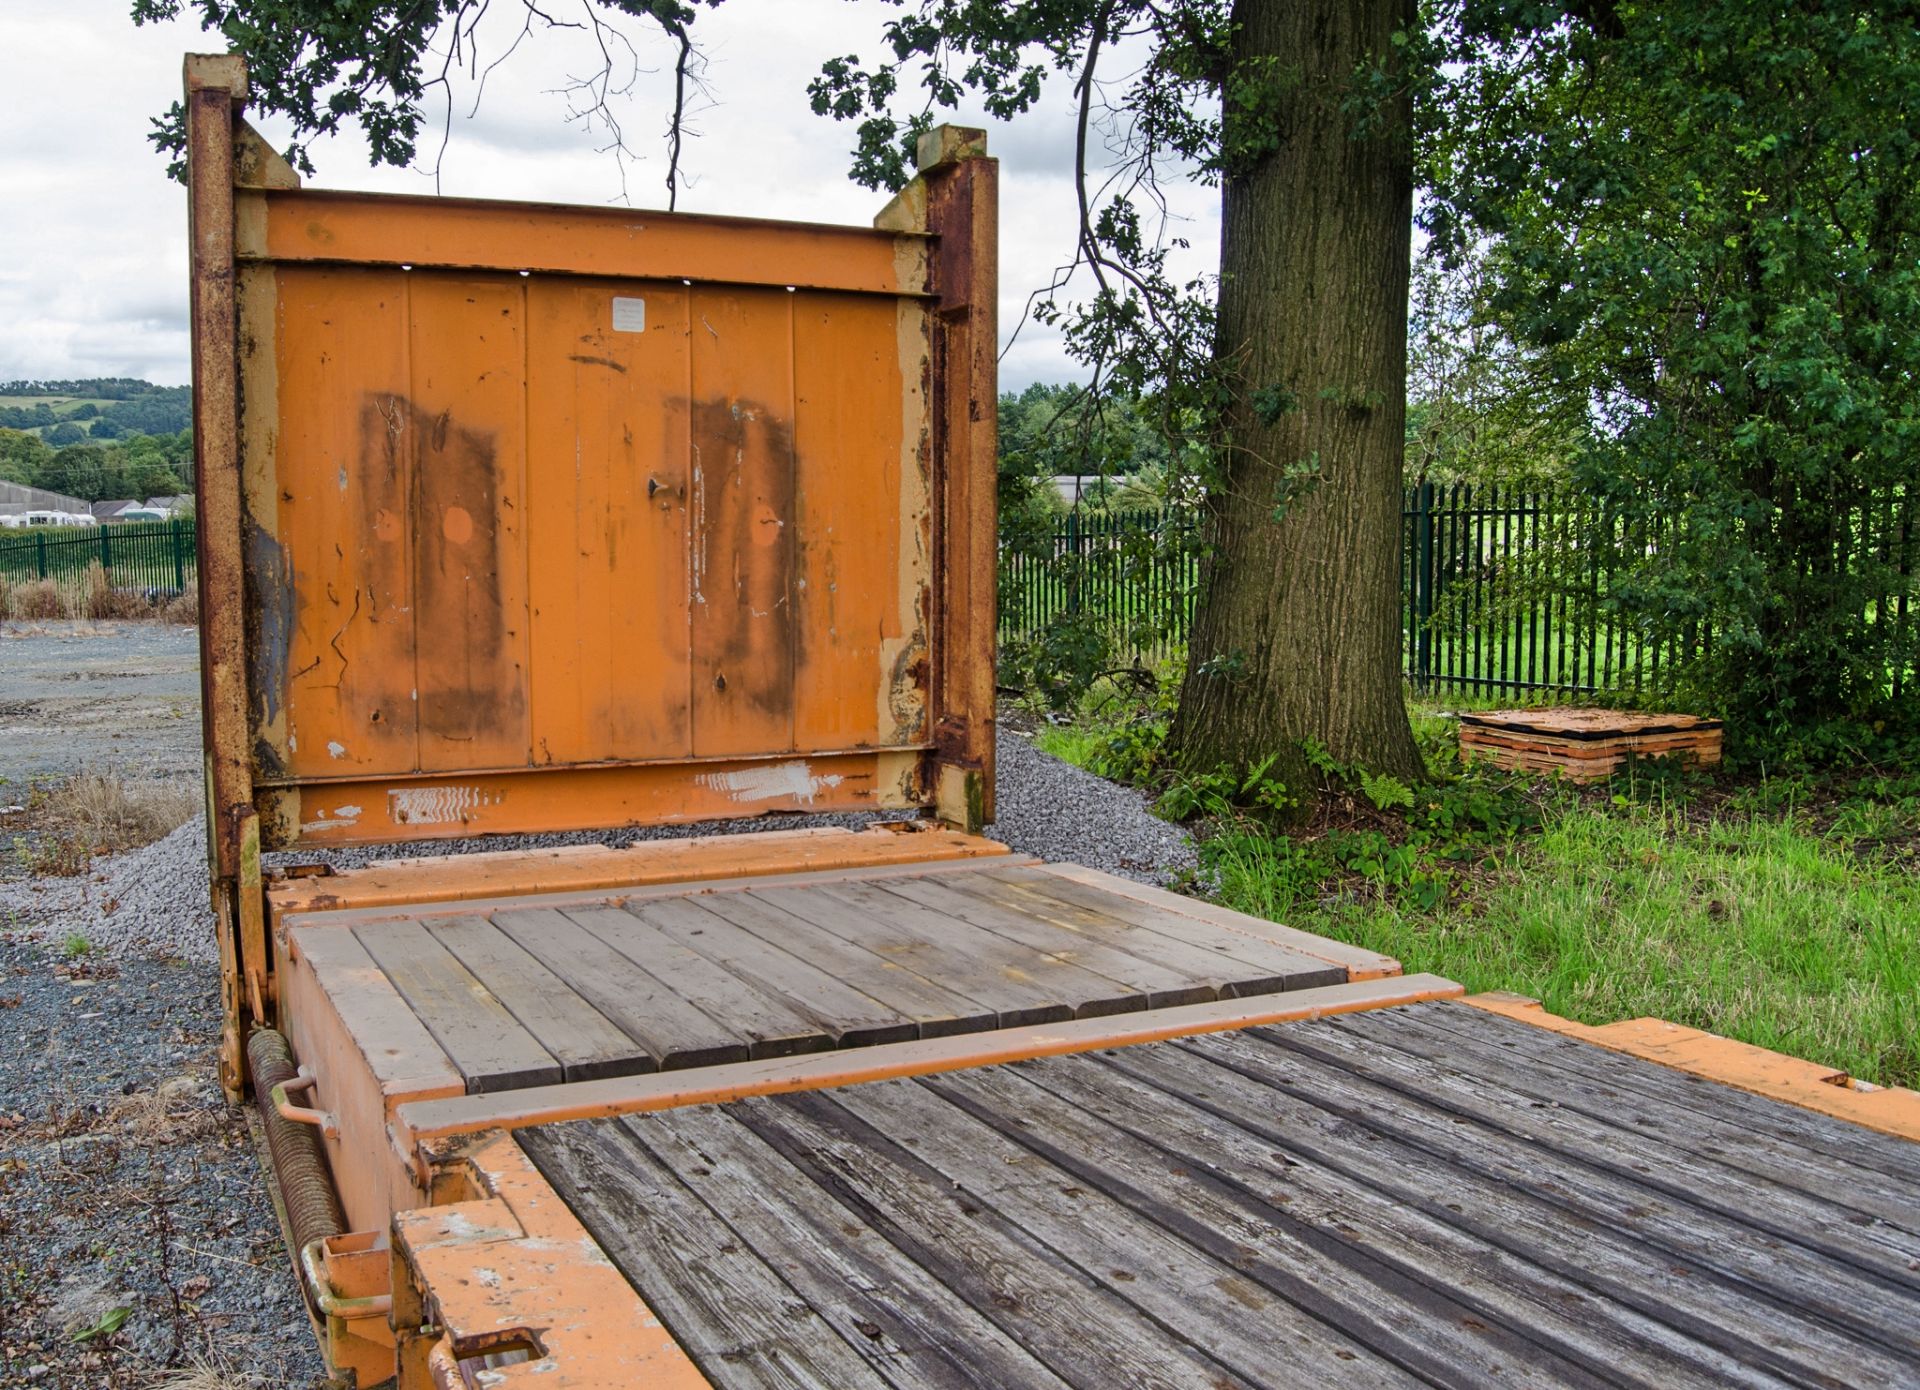 50 tonne flat rack container - Image 4 of 9